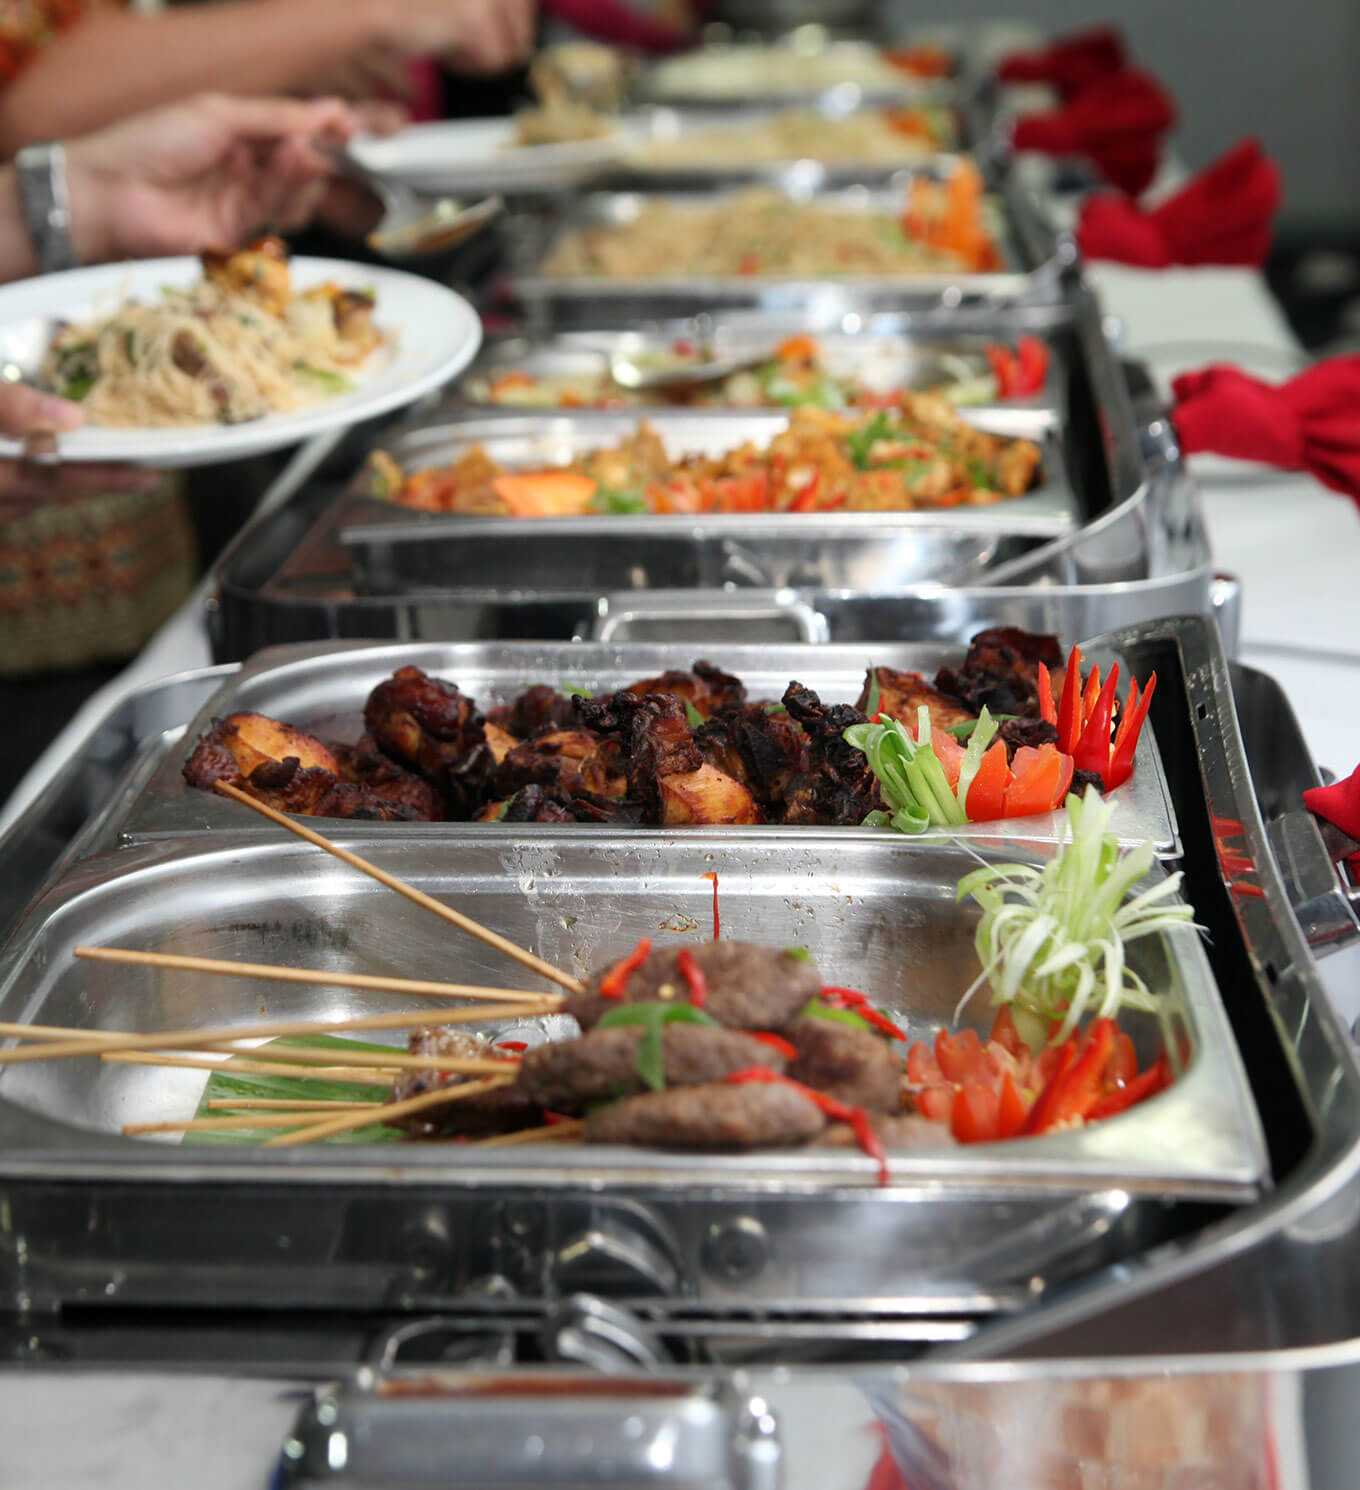 Buffet with Multiple Entrees and Discount Offer